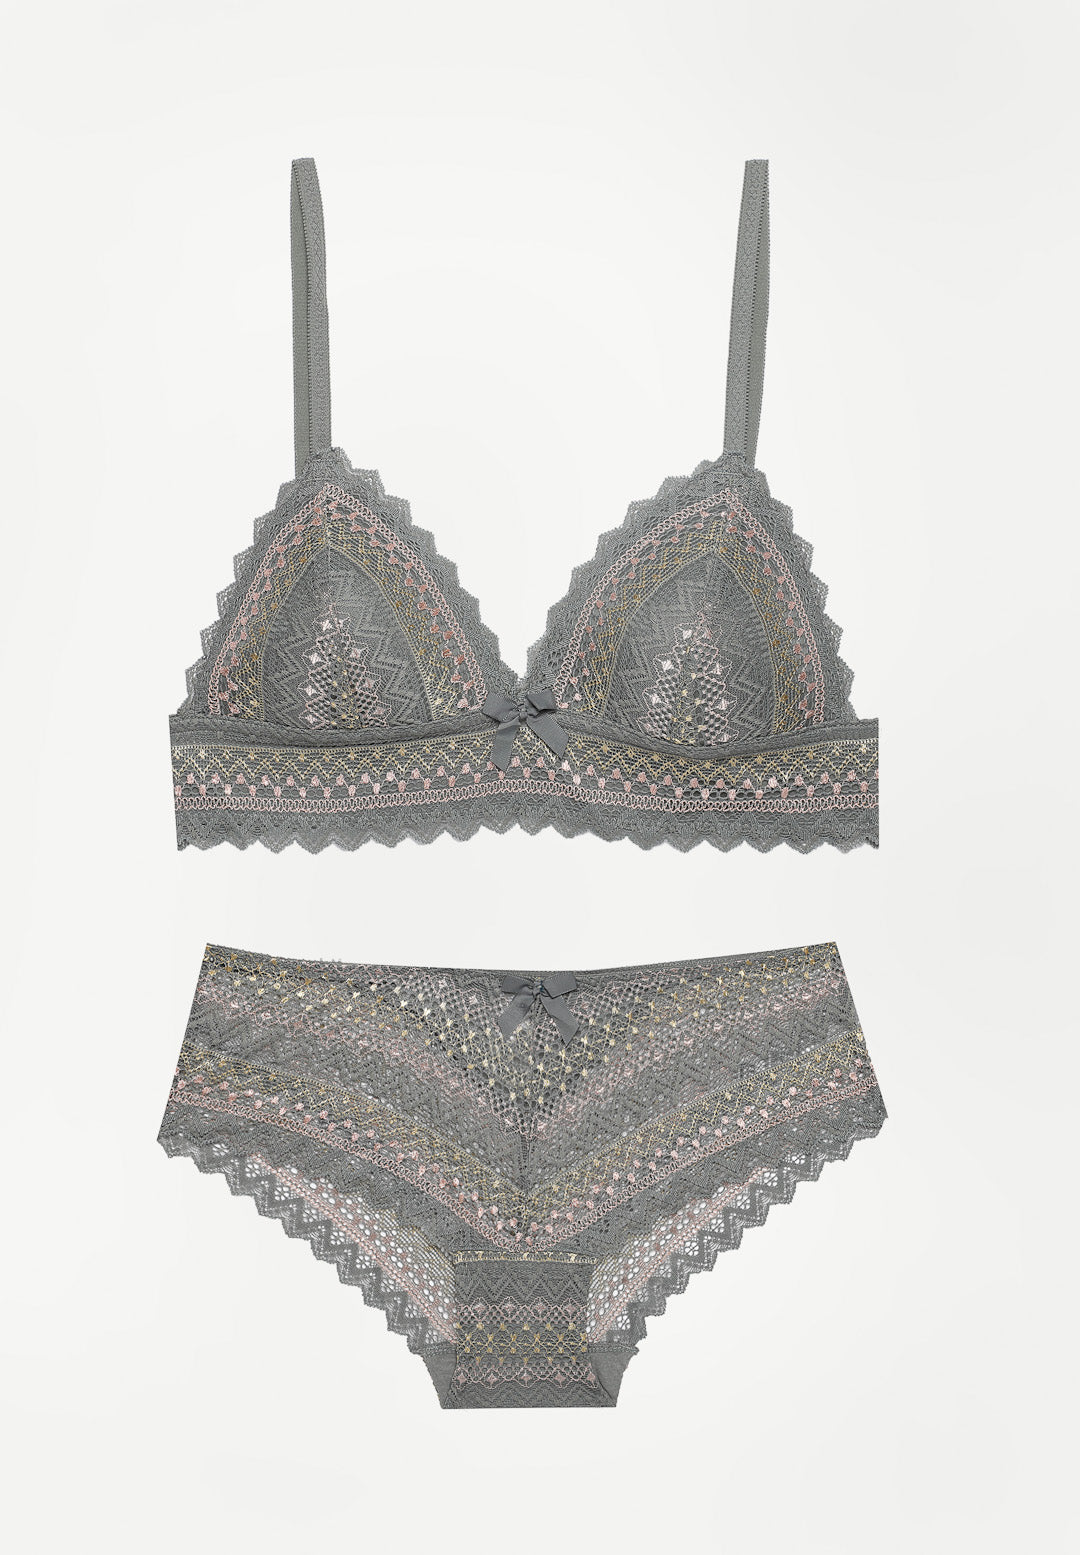 Padded Non-wired Lace Bra Set